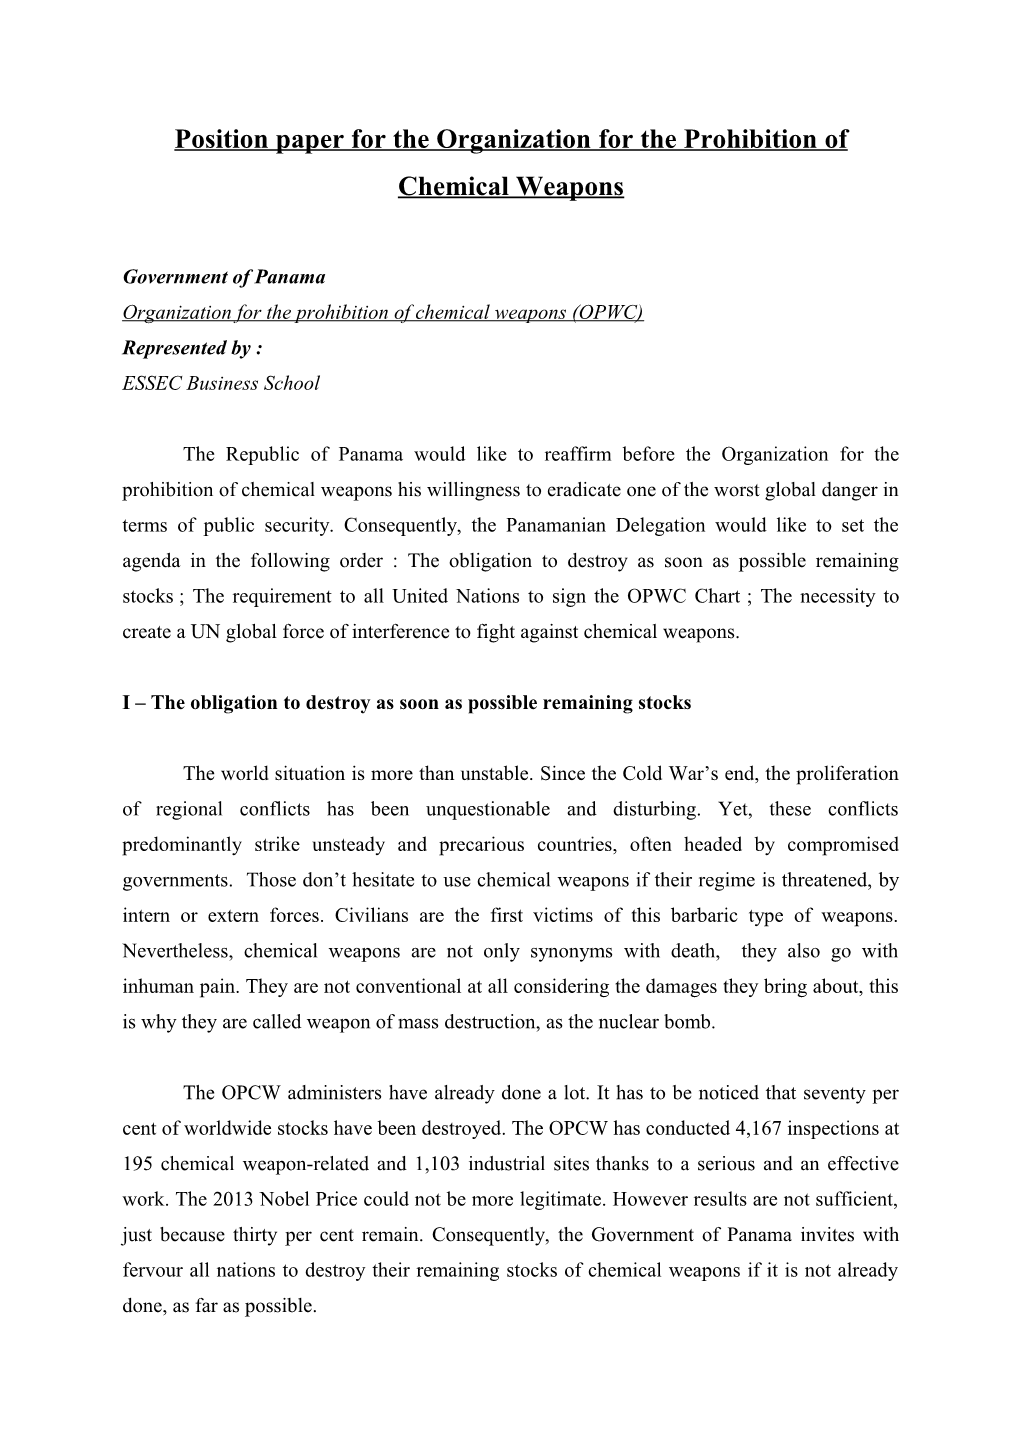 Position Paper for the Organization for the Prohibition of Chemical Weapons